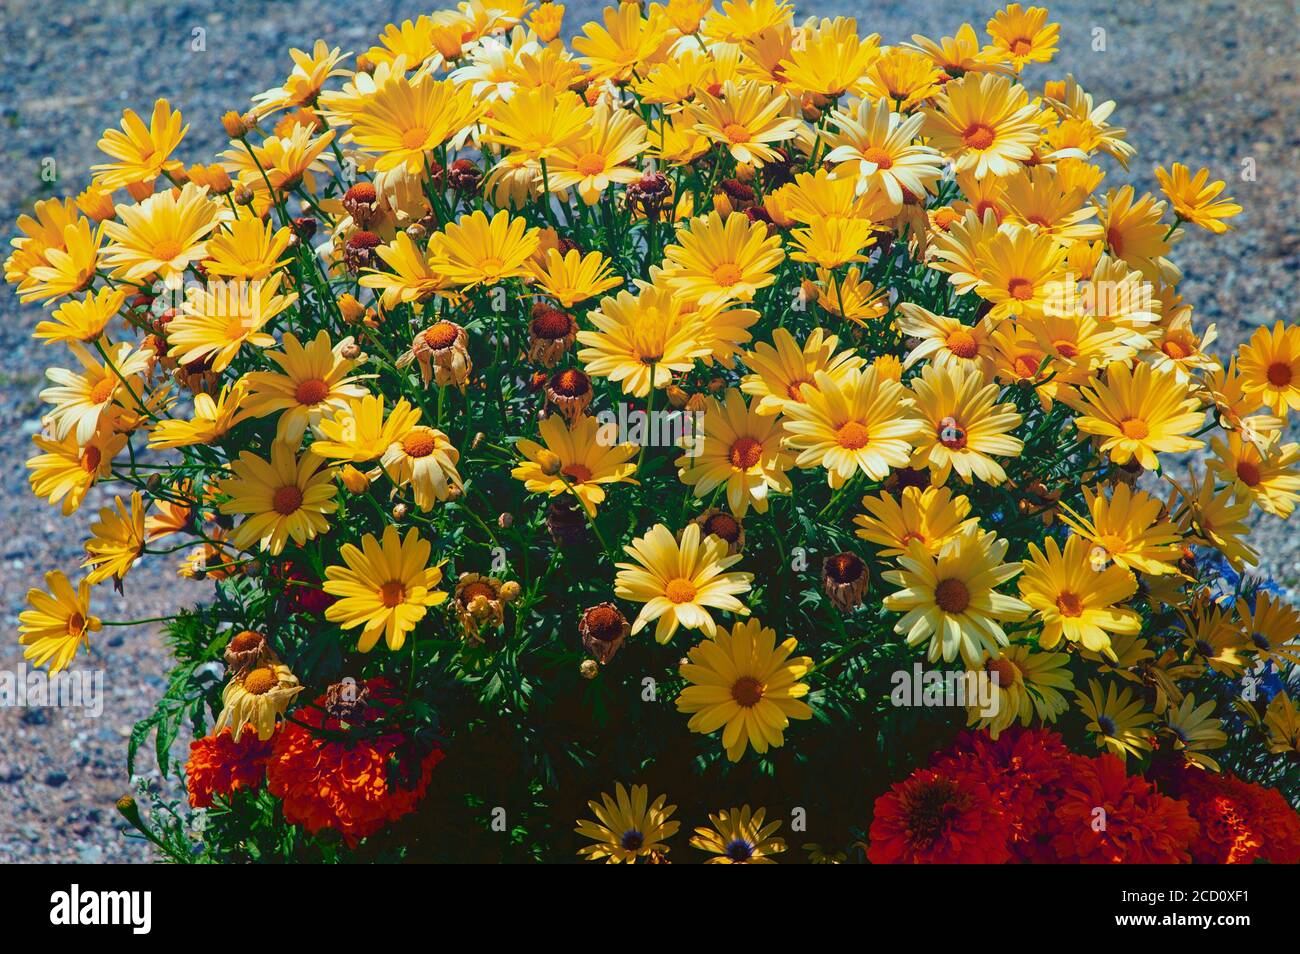 Different species of flowers together add a delightful image. Stock Photo